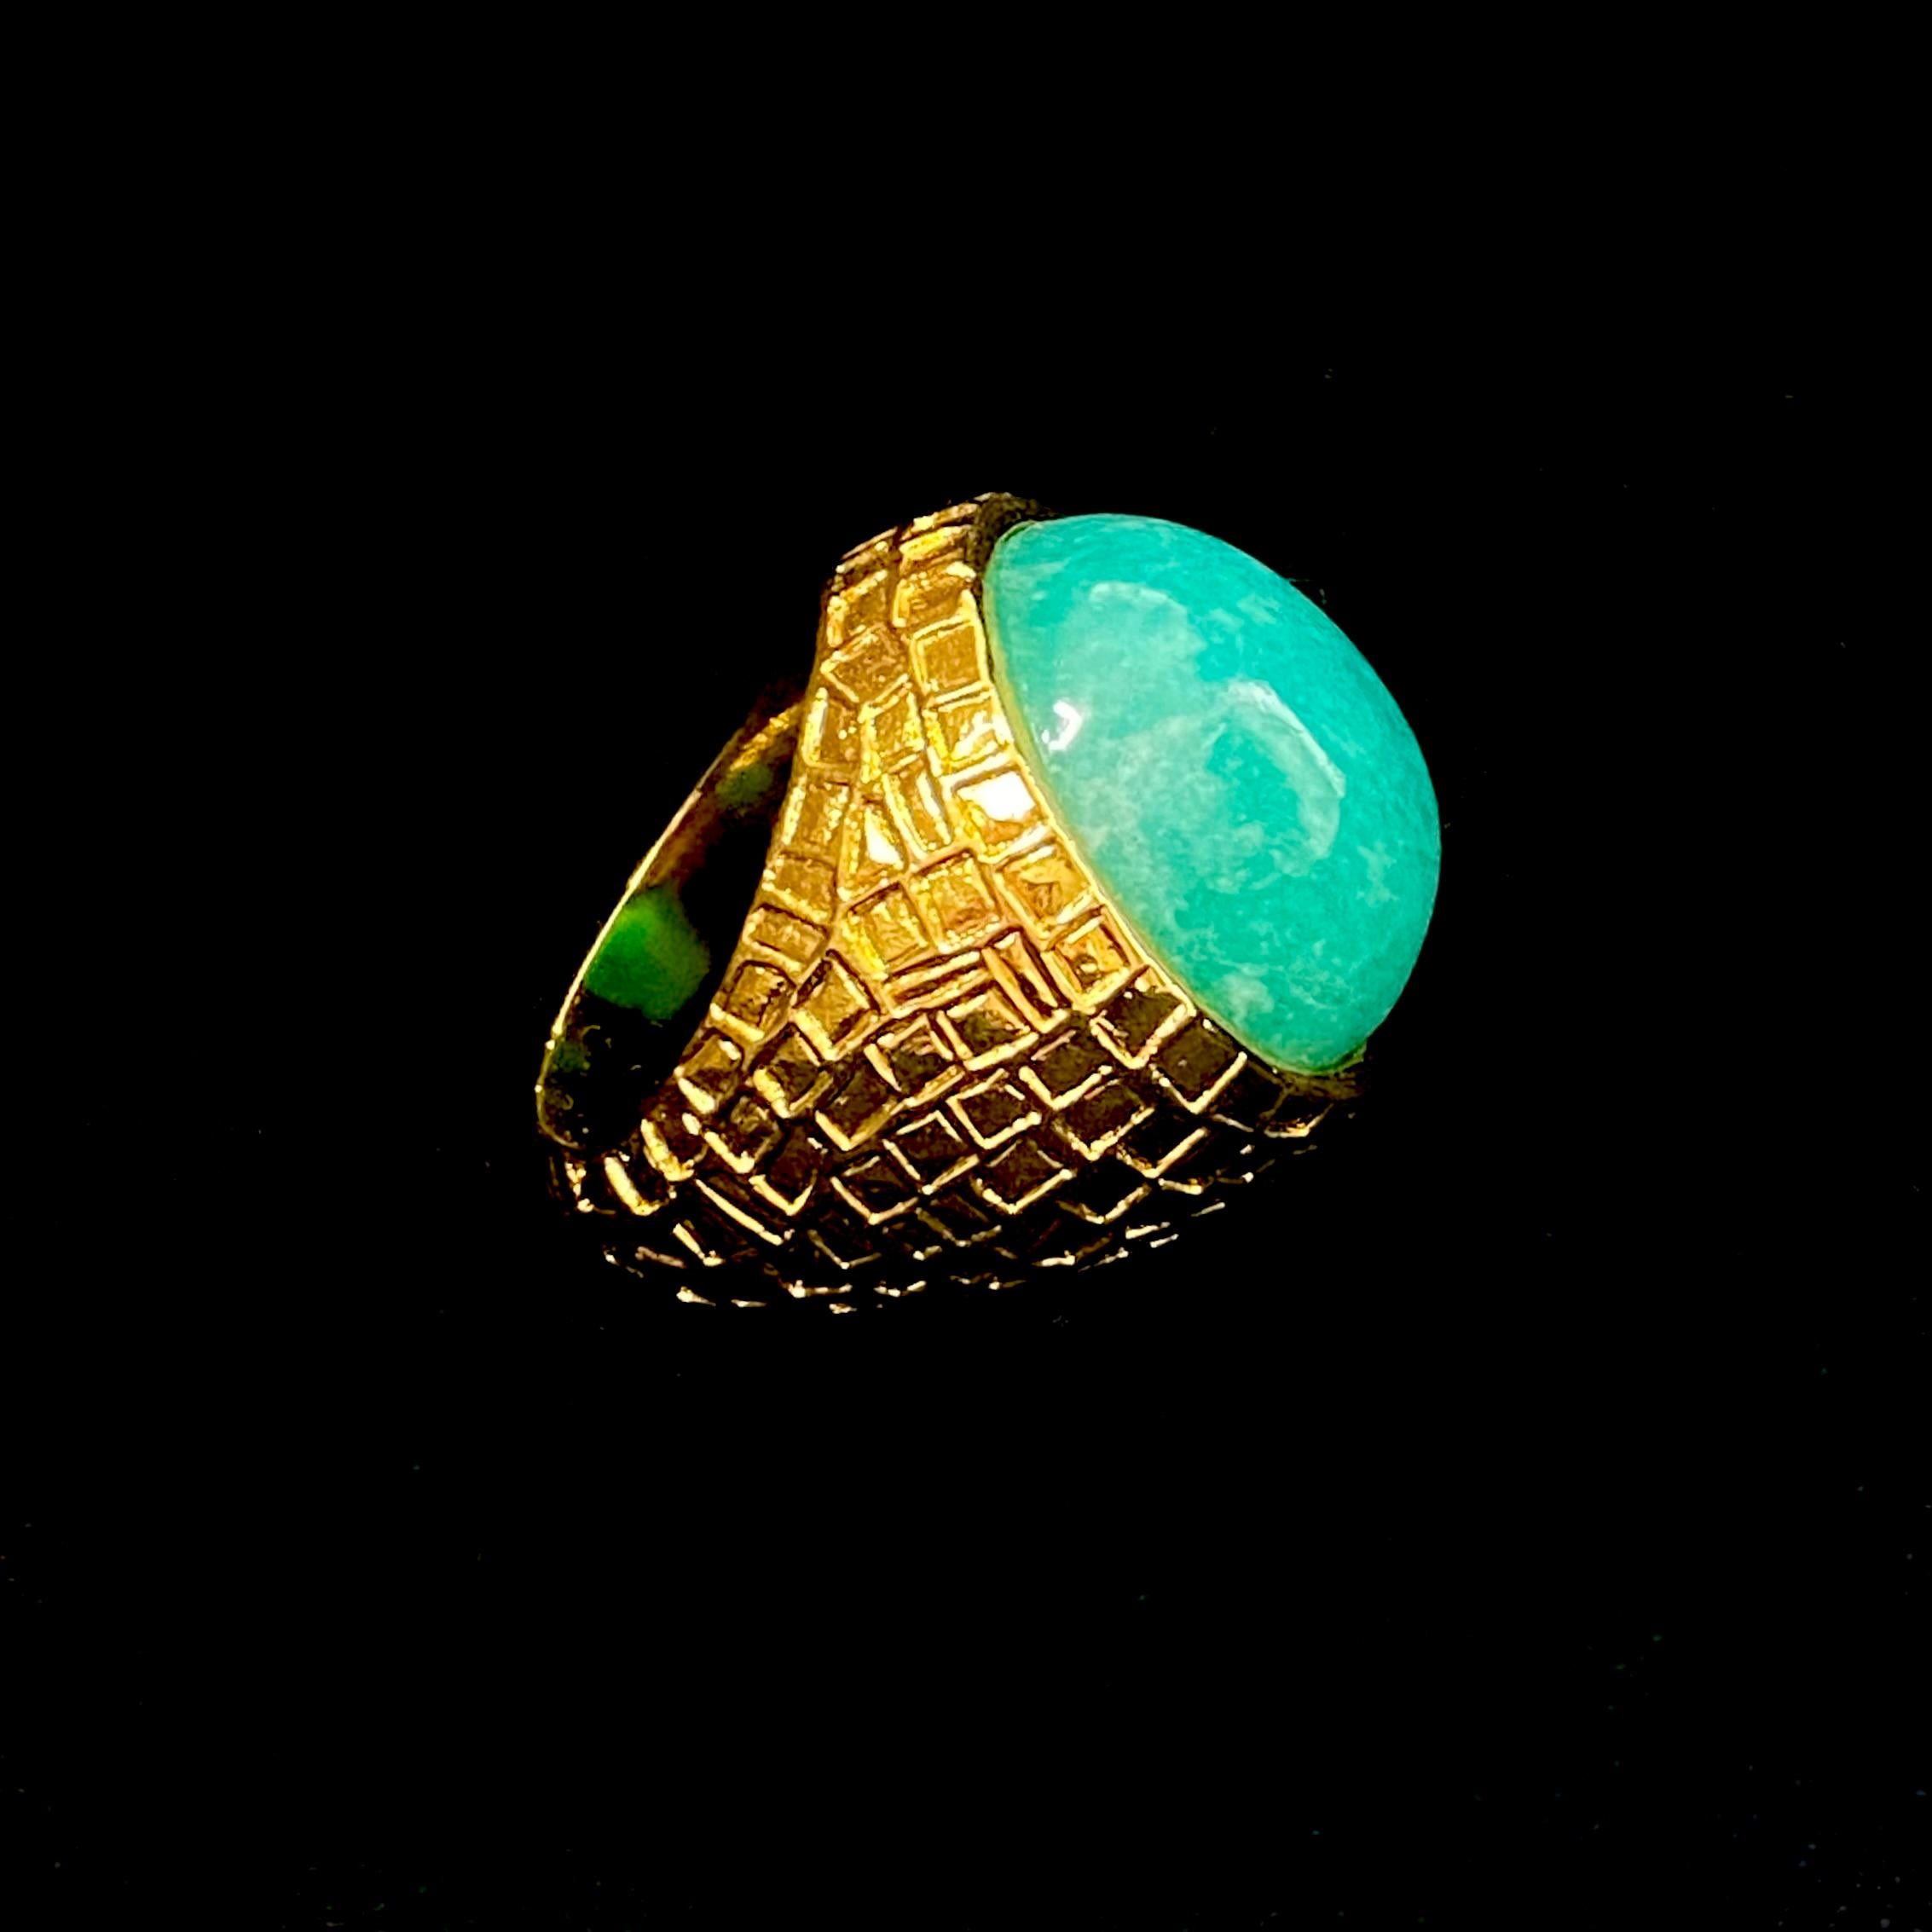 The beautifully vibrant oval cabochon Amazonite bezel set within a simple, yet striking Chiselled ring - perfect for day or night.

The Amazonite measures 20mm x 18mm; the ring stands 14.5mm 'proud' on the finger

This ring is a US size 7.5; while